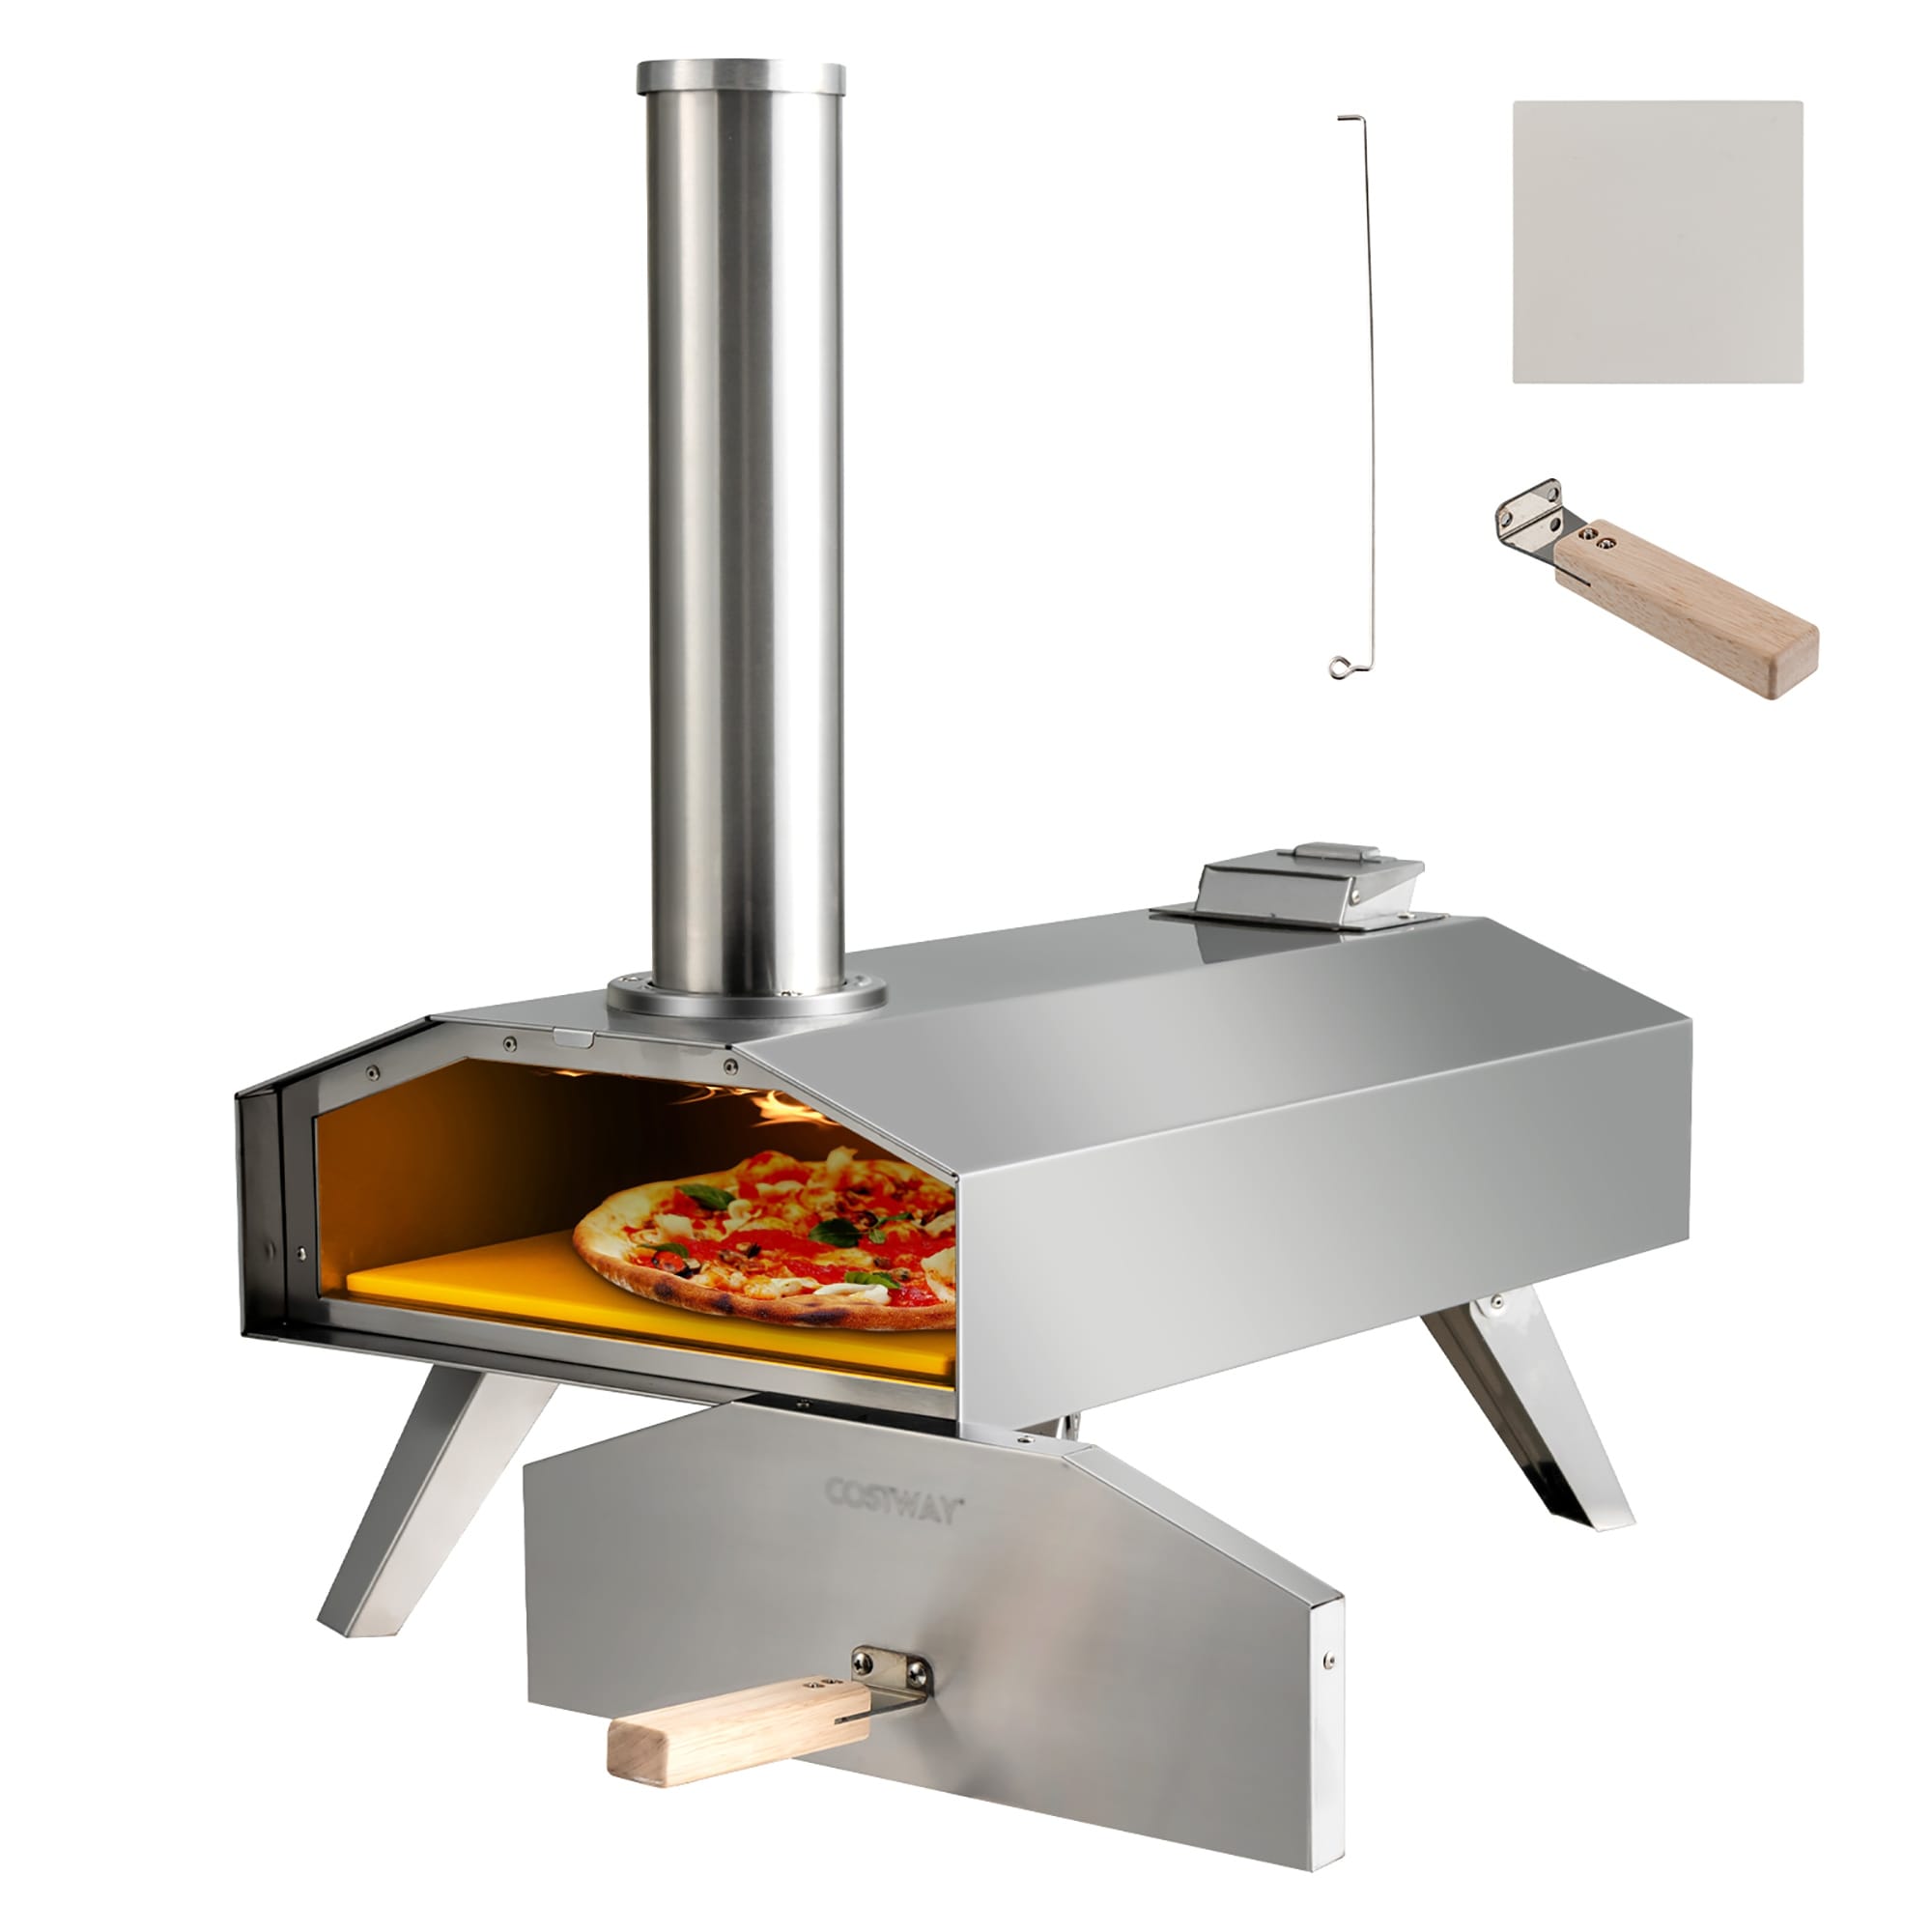 https://ak1.ostkcdn.com/images/products/is/images/direct/f6c10ec5fa1992b3ba79a3de917cab4677a973f2/Costway-Wood-Pellet-Pizza-Oven-Pizza-Maker-Portable-Outdoor-Pizza.jpg